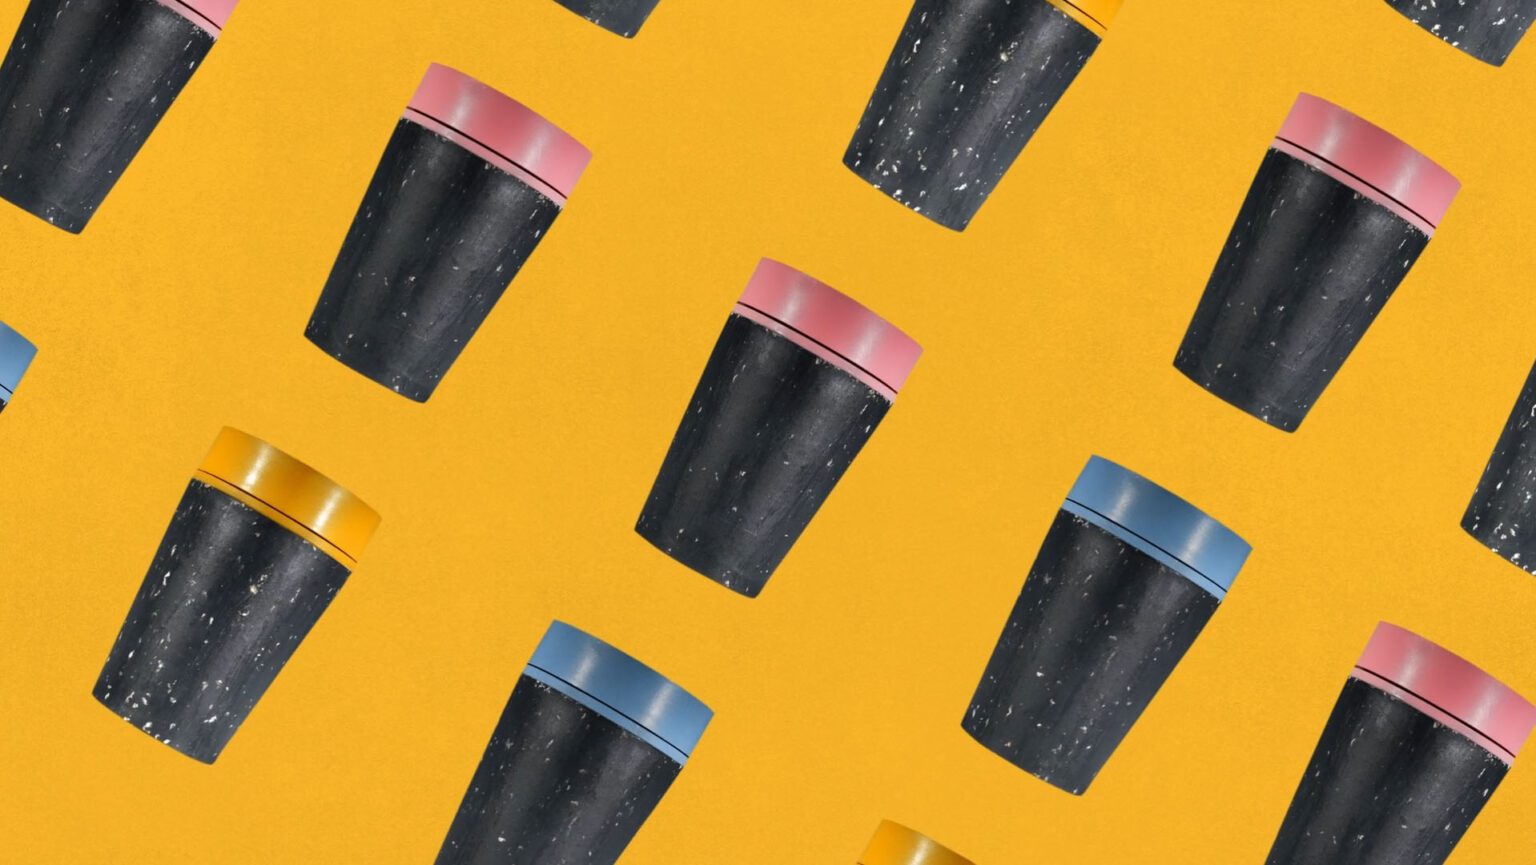 Circular cups on a yellow background